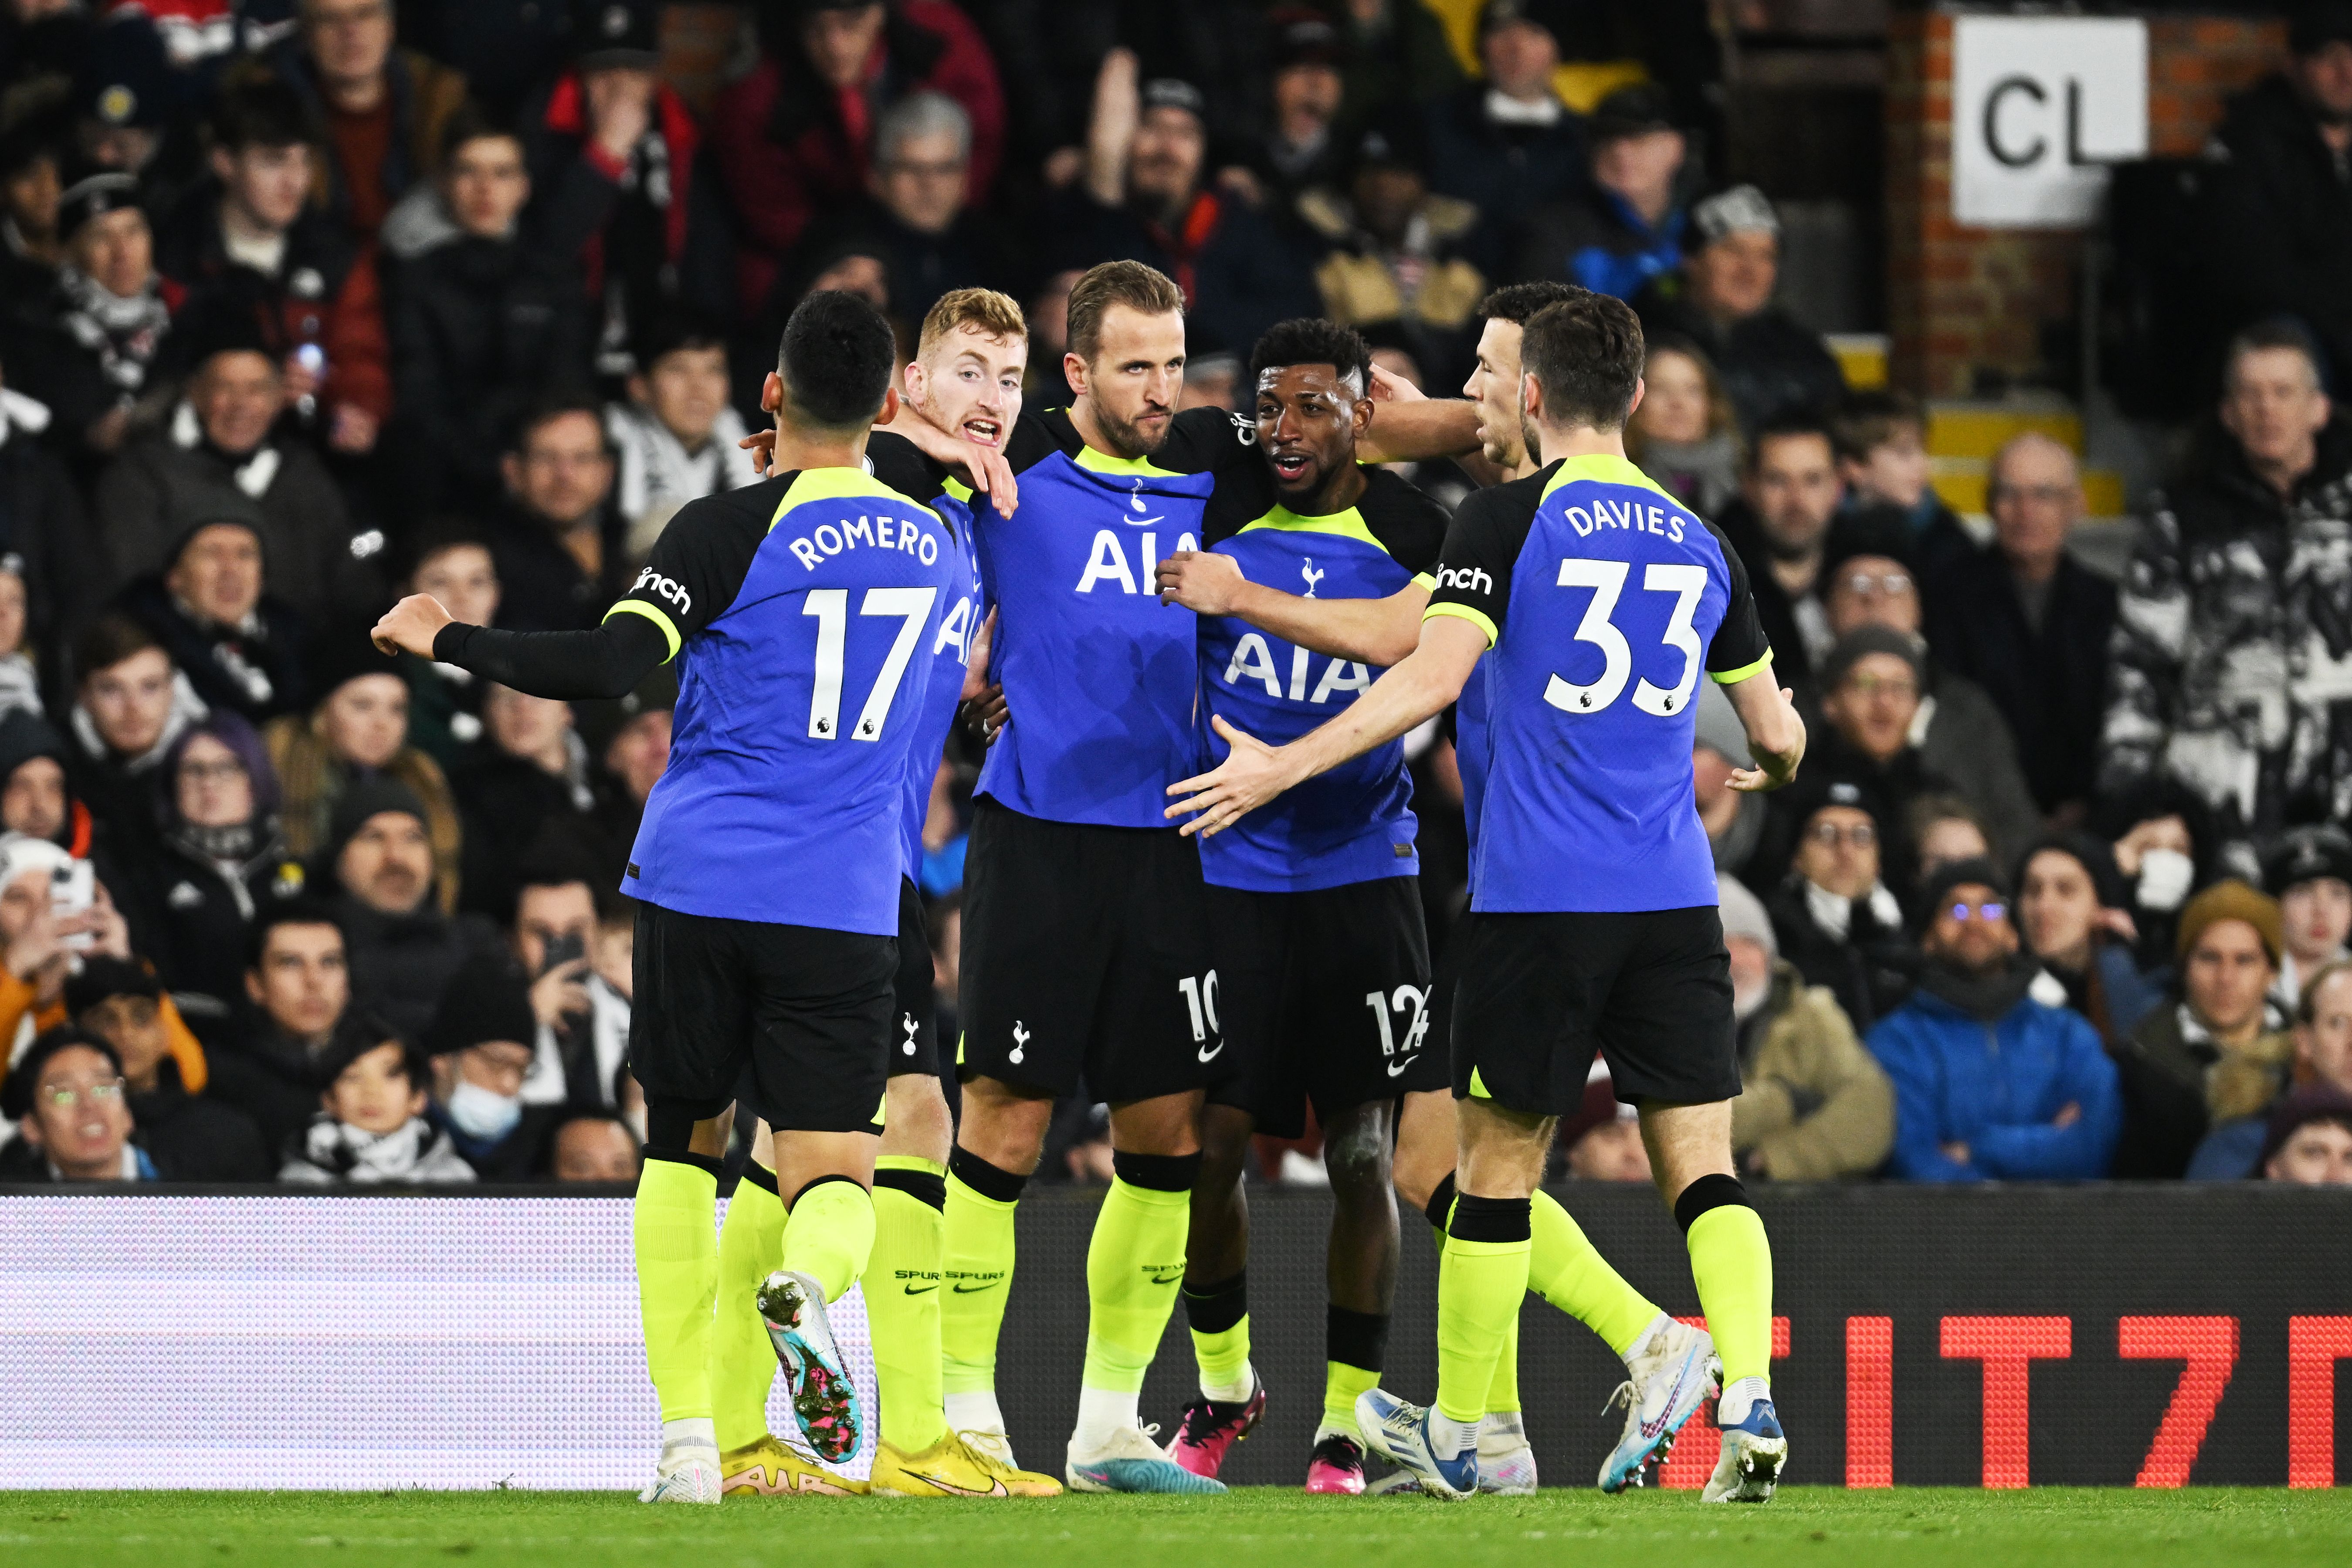 Harry Kane of Tottenham Hotspur celebrates after scoring the team's first goal during the Premier League match between Fulham FC and Tottenham Hotspur at Craven Cottage on January 23, 2023 in London, England. 